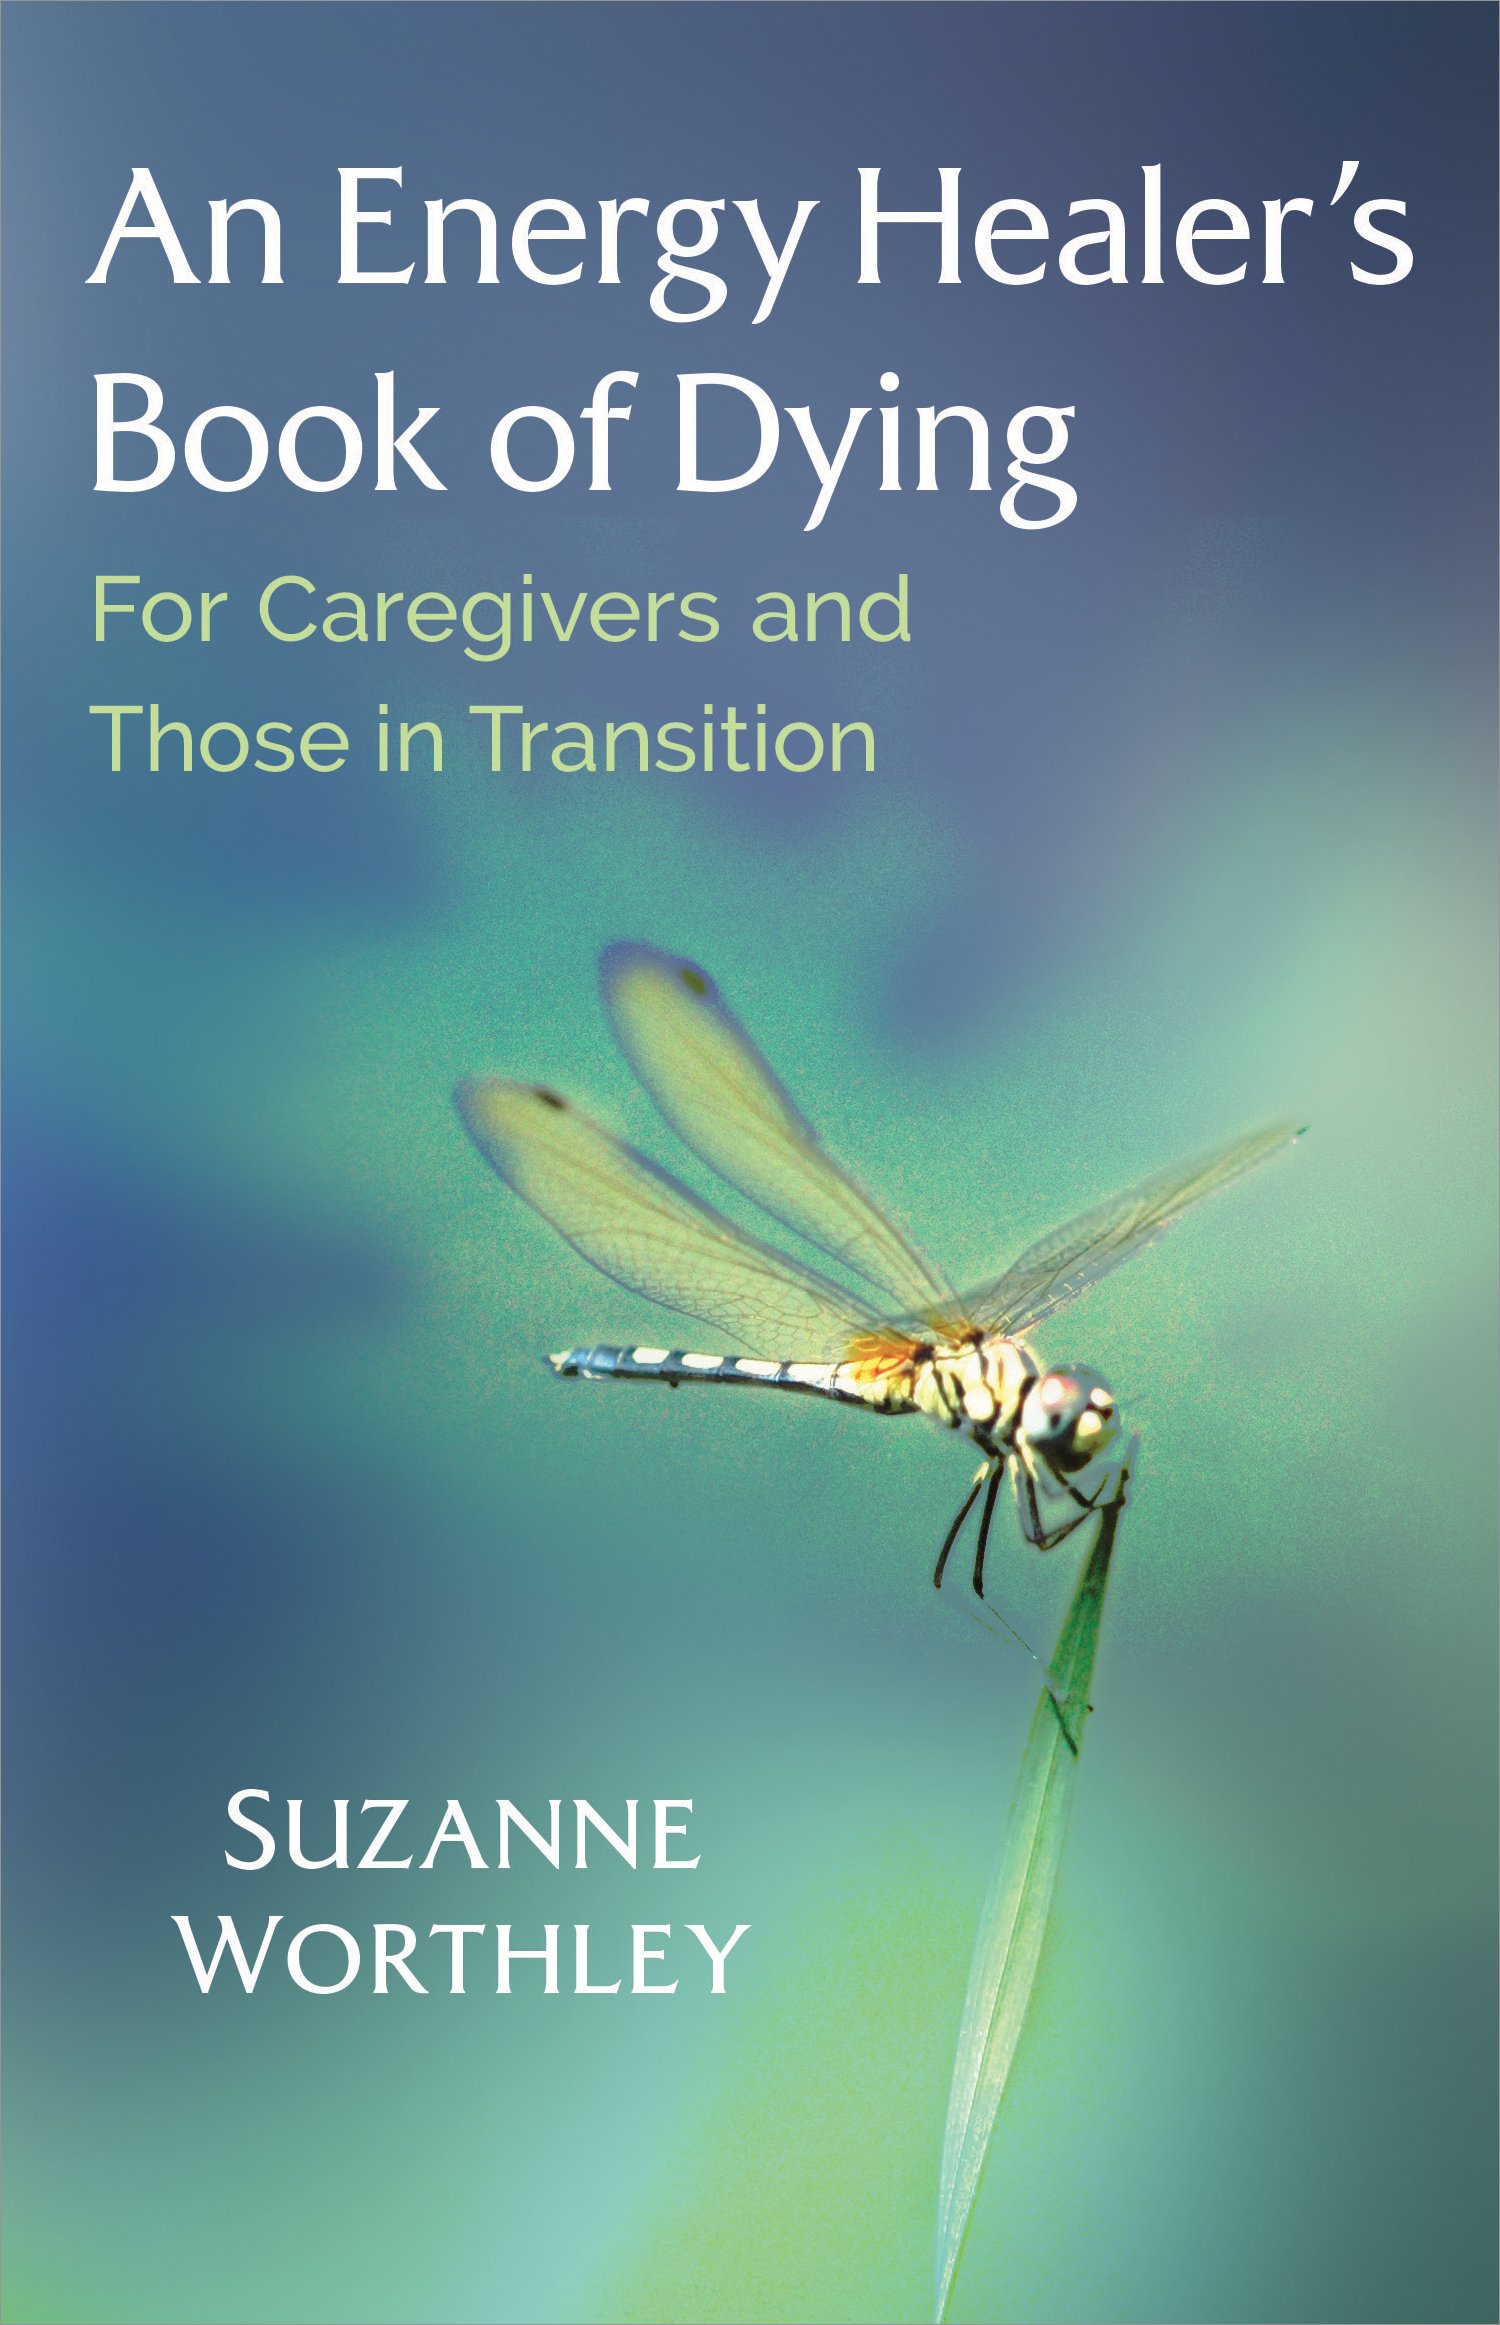 An Energy Healer's Book of Dying